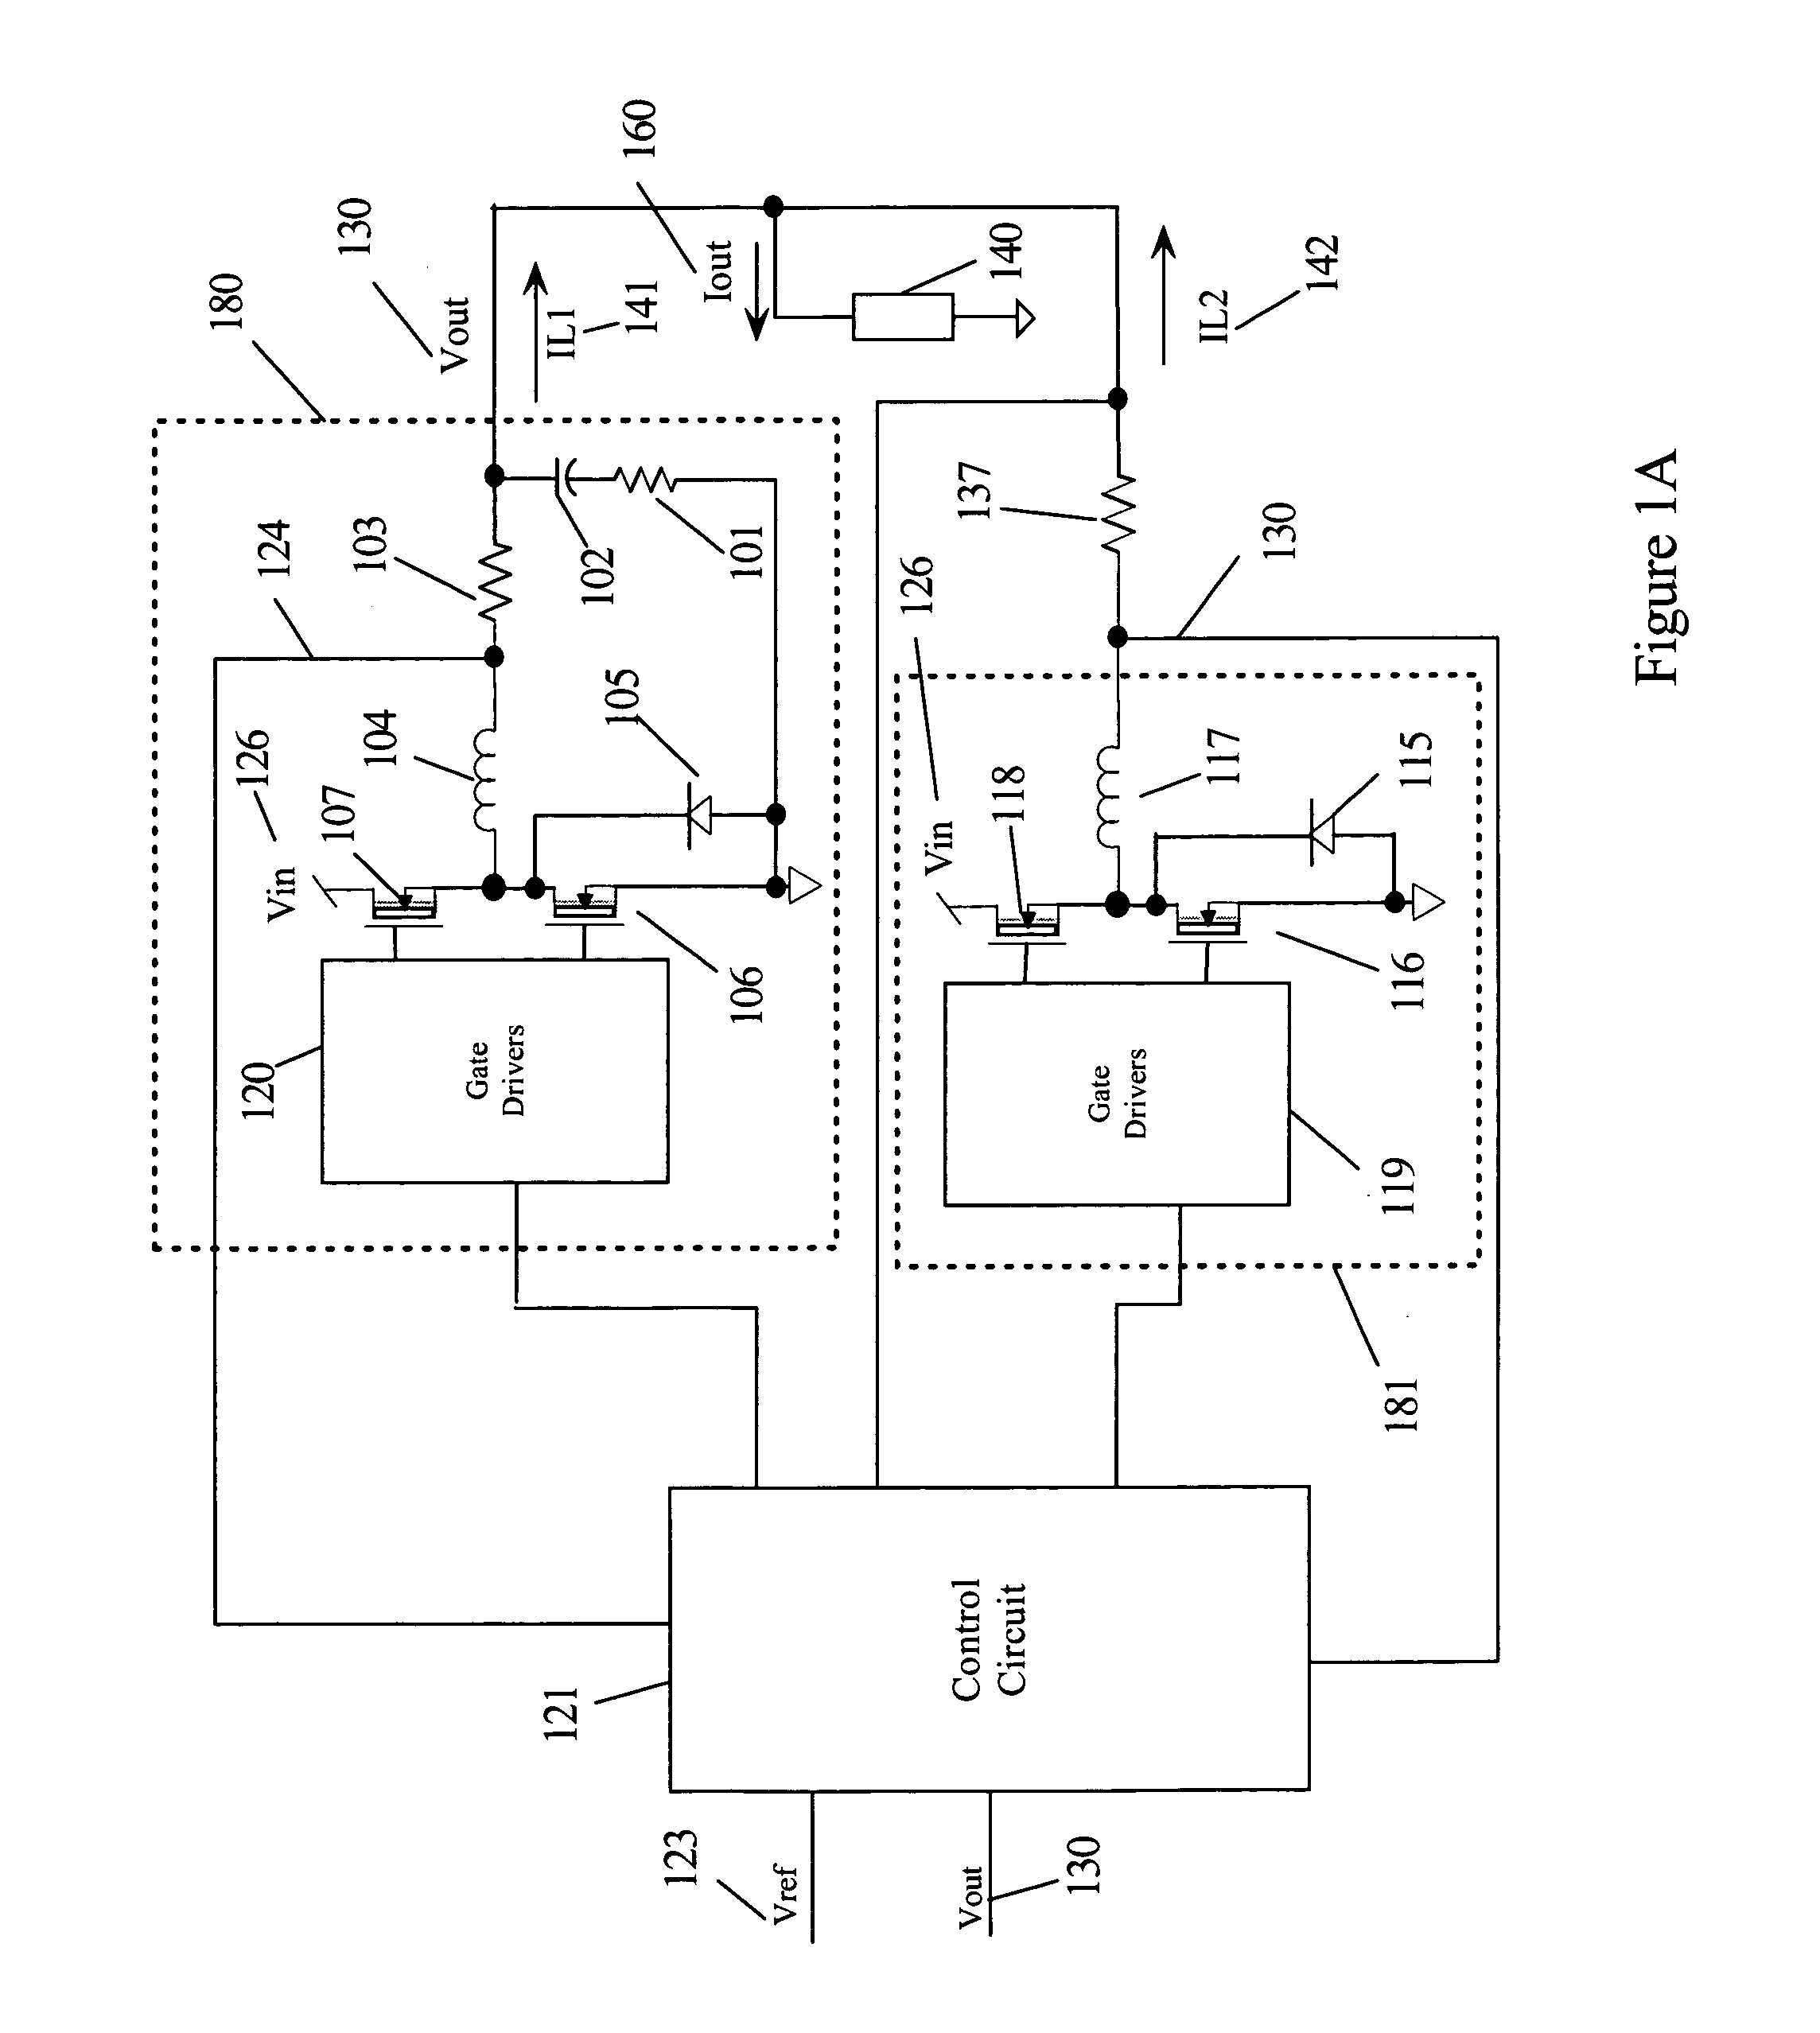 Peak current sharing in a multi-phase buck converter power system